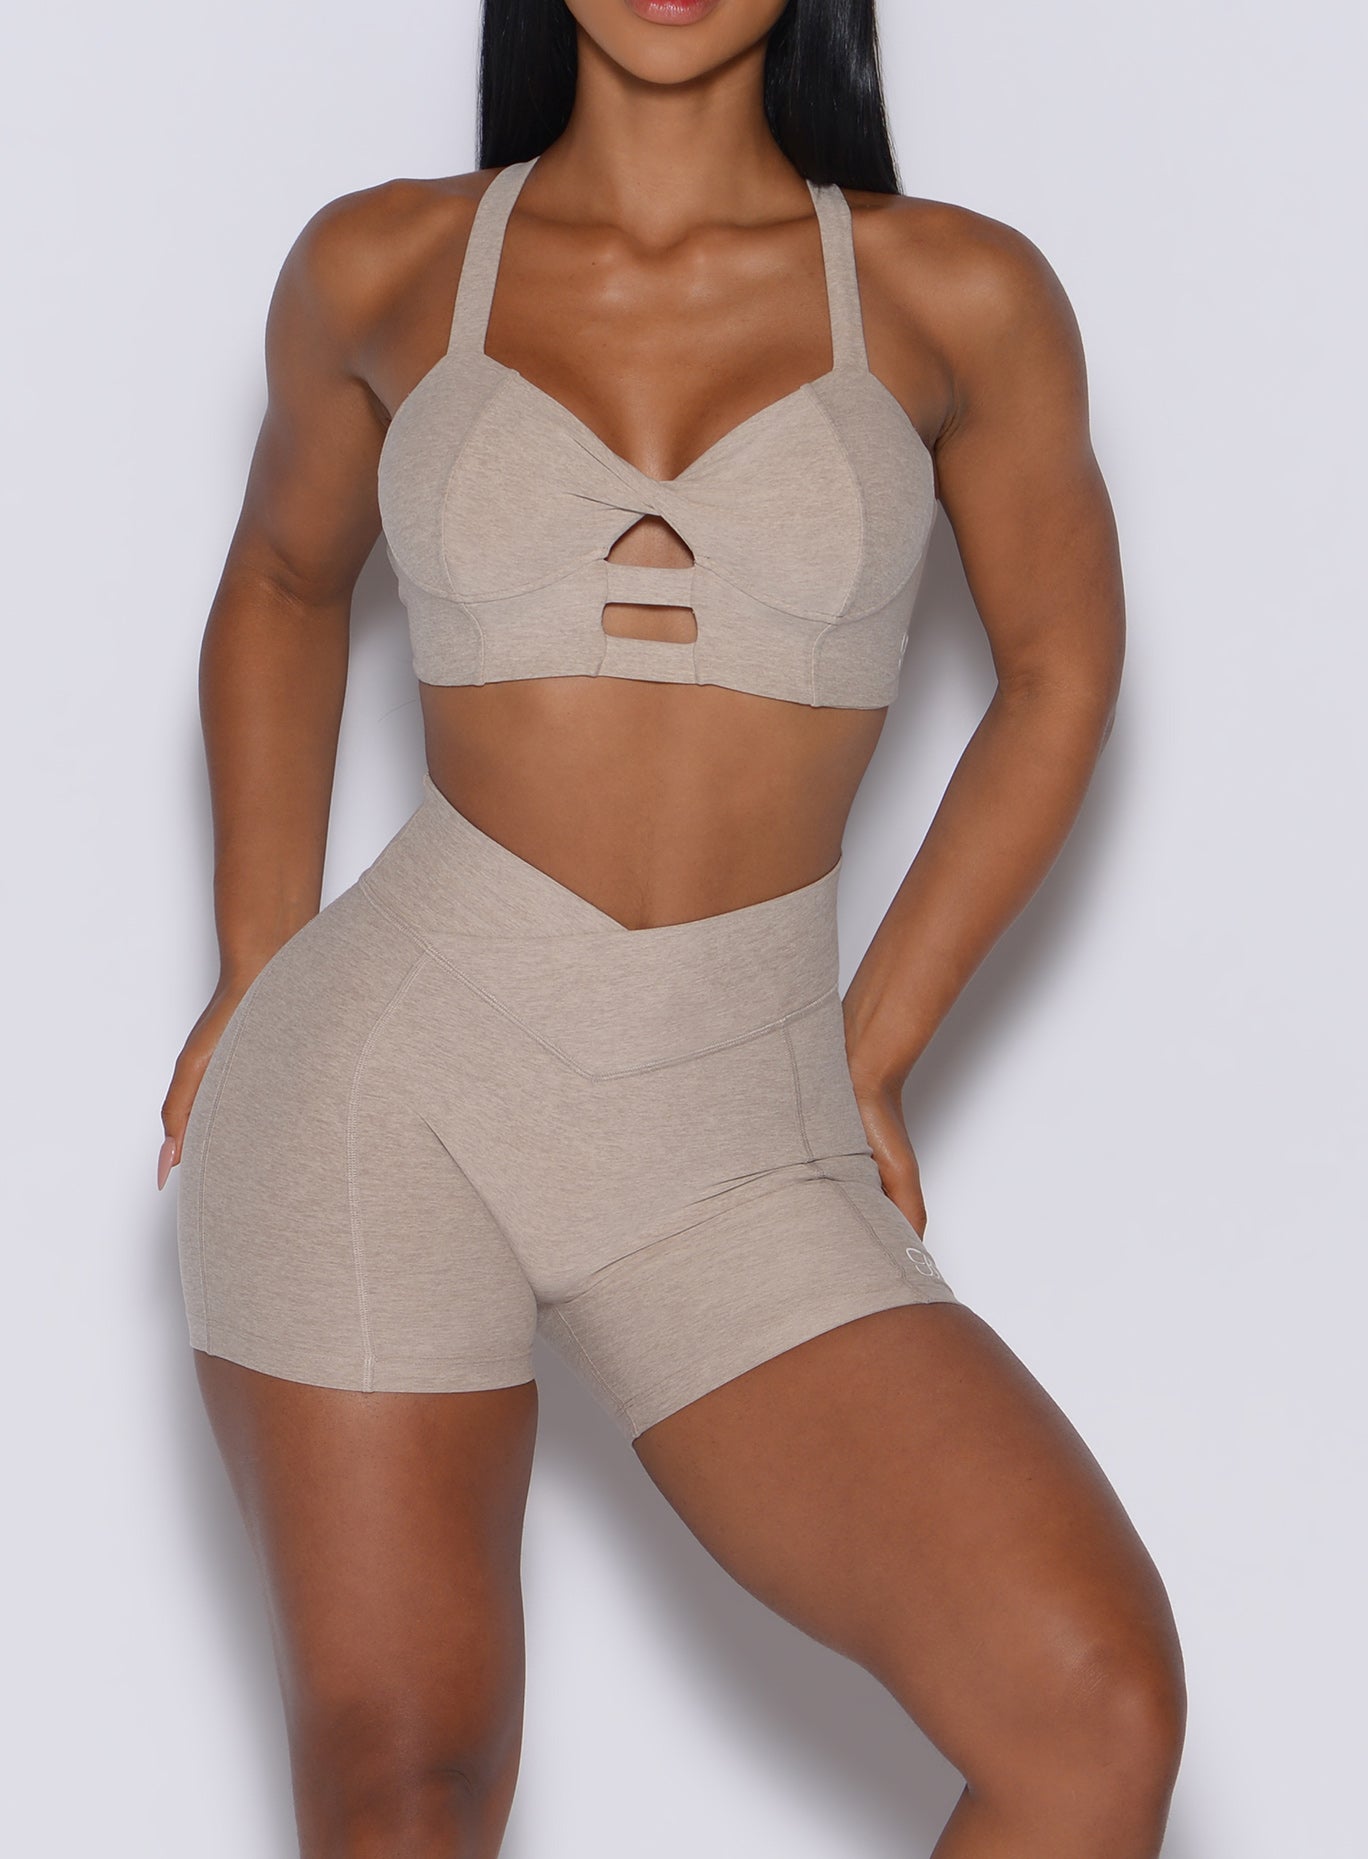 zoomed in front view of a model wearing our Tiny Waist Shorts in Taupe color and a matching sports bra